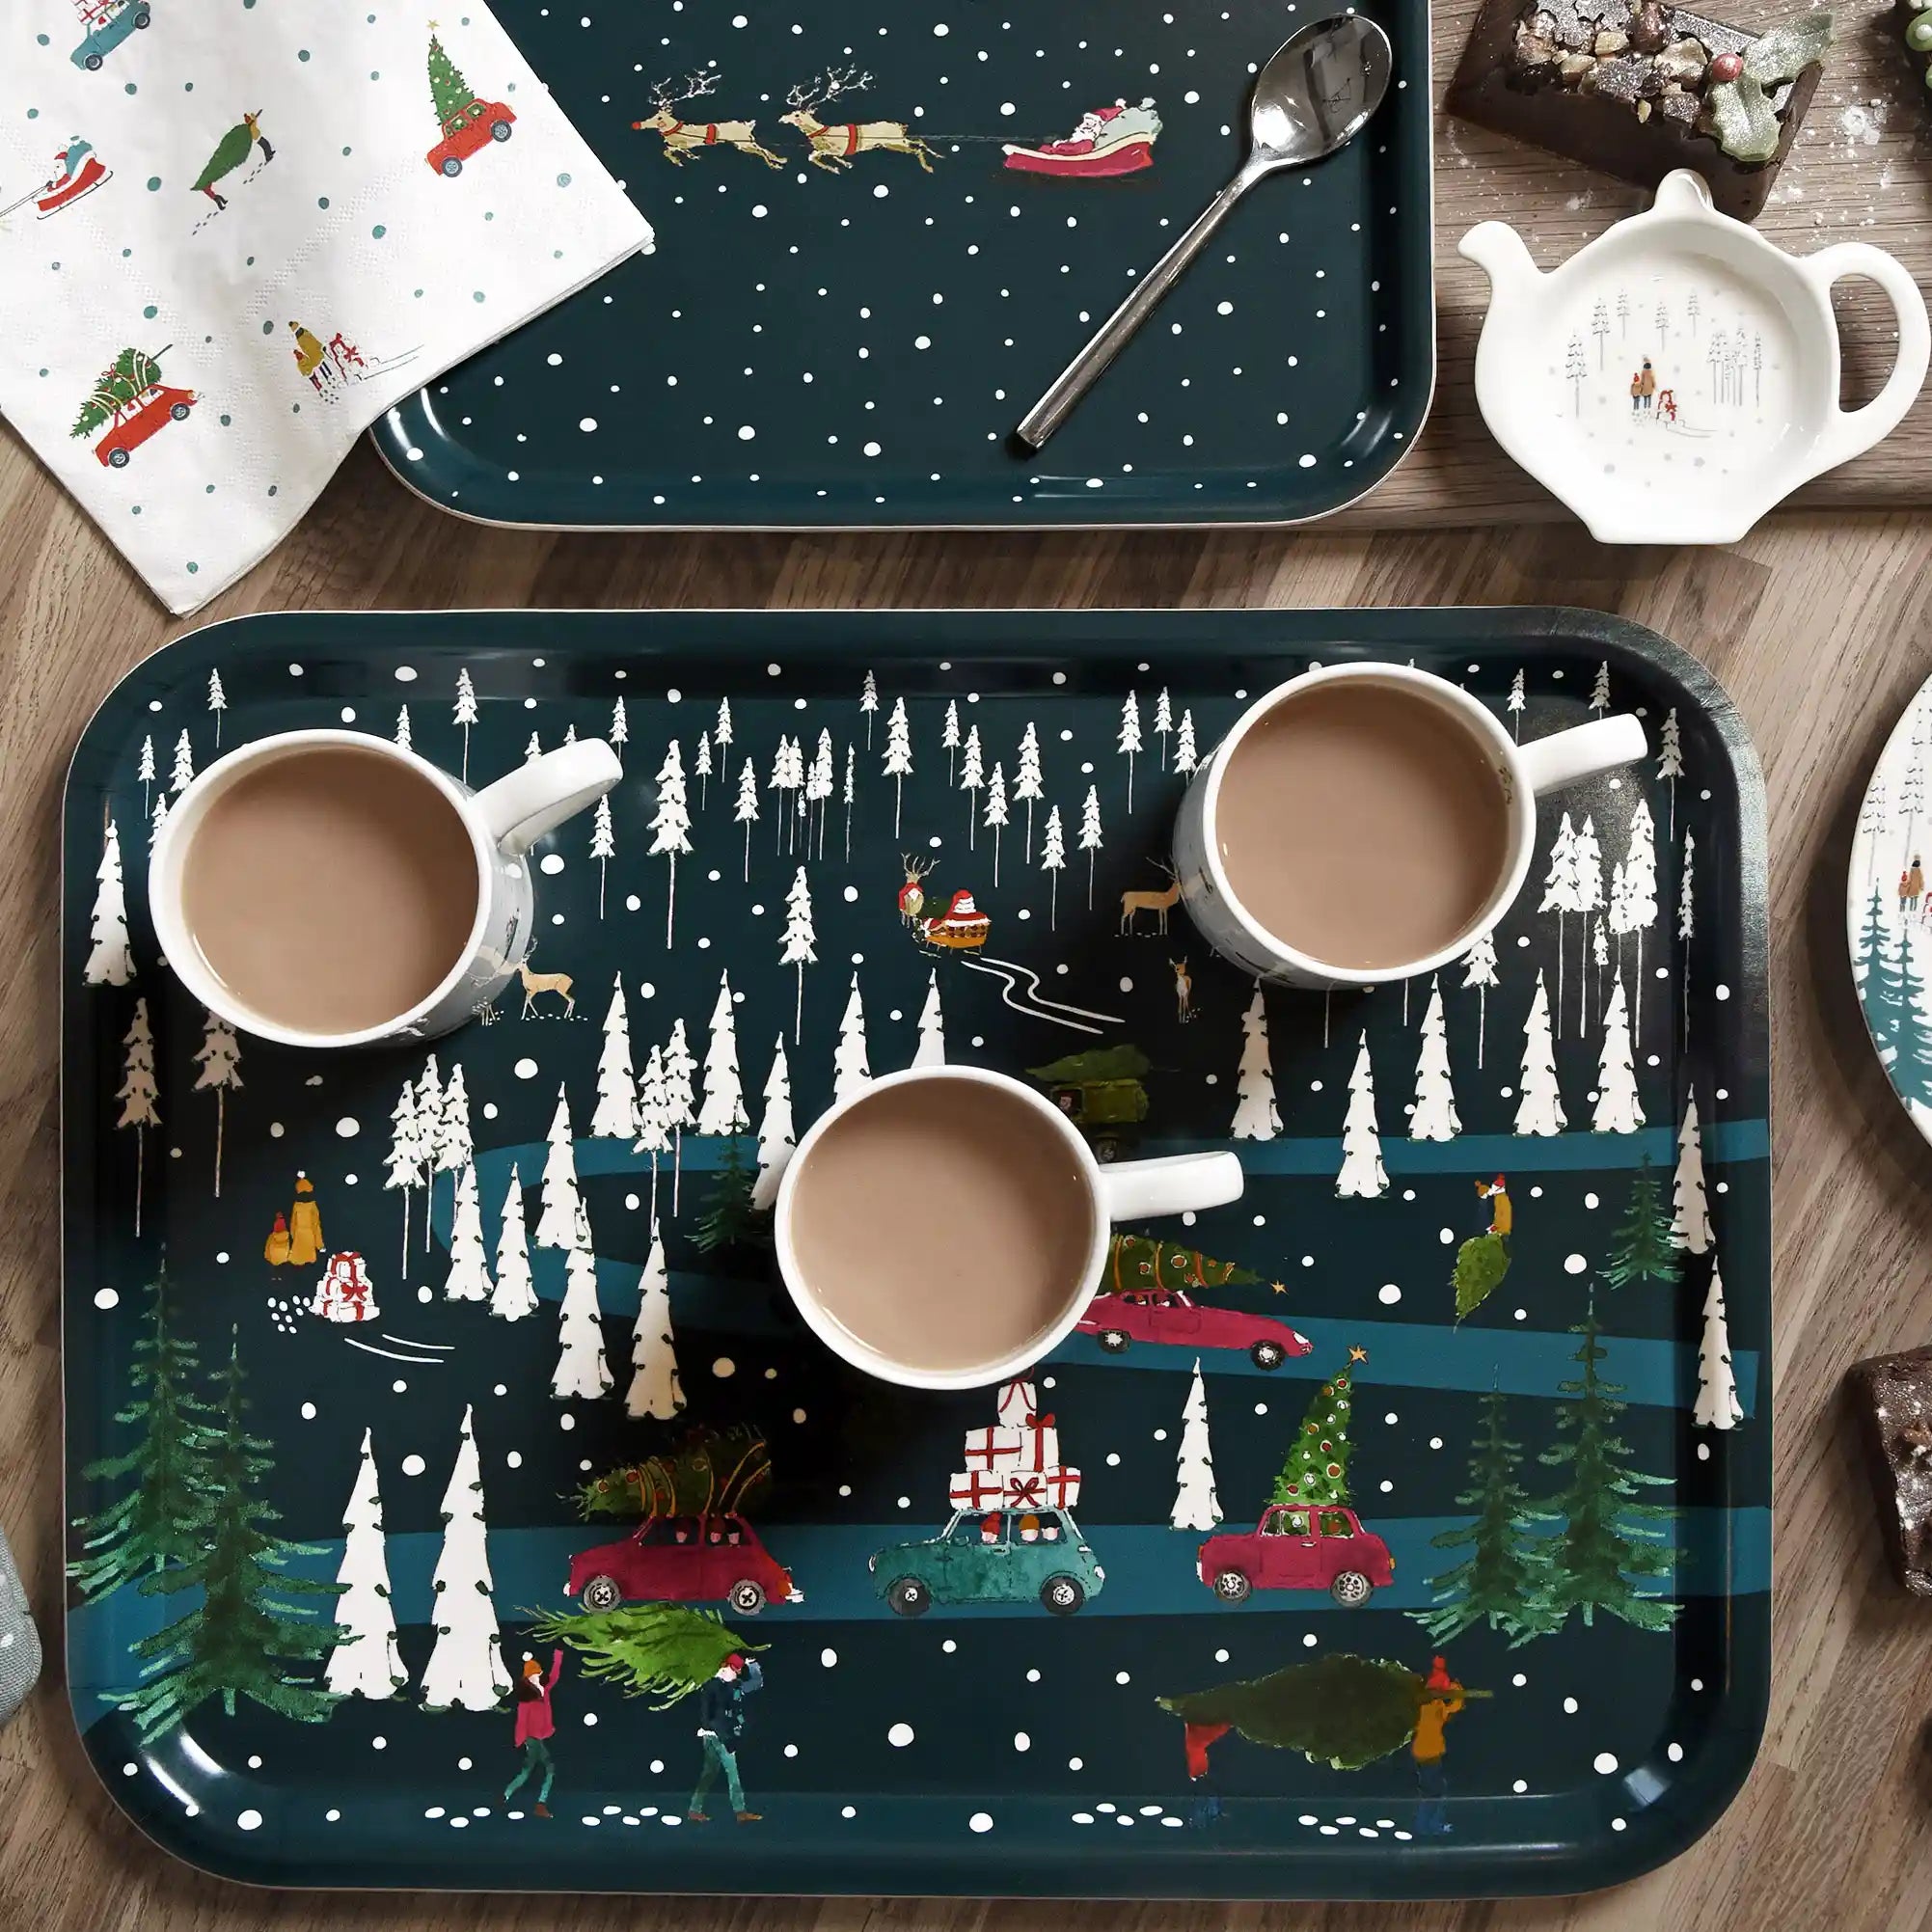 Home for Christmas Serving Tray - Small